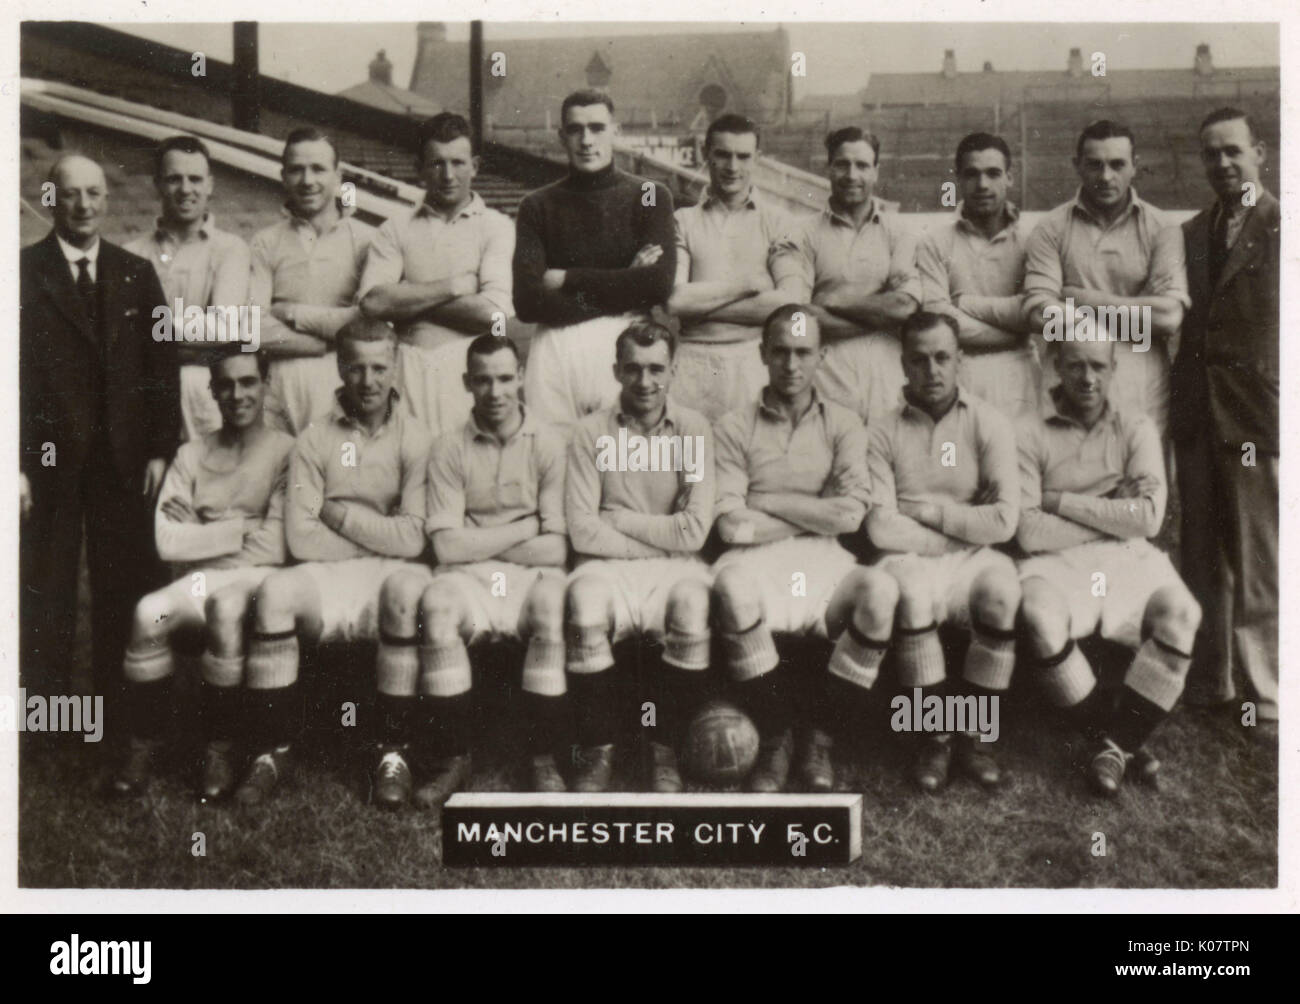 Manchester City FC football team 1934-1935. Back row: Chorlton (Trainer), Dale, Busby (Captain), Cowan, Swift, Donnelly, Bray, Percival, Barkas, Barnett (Assistant Trainer). Front row: Dellow, Marshall, Toseland, Herd, Heale, Tilson, Brook.     Date: 1934-1935 Stock Photo